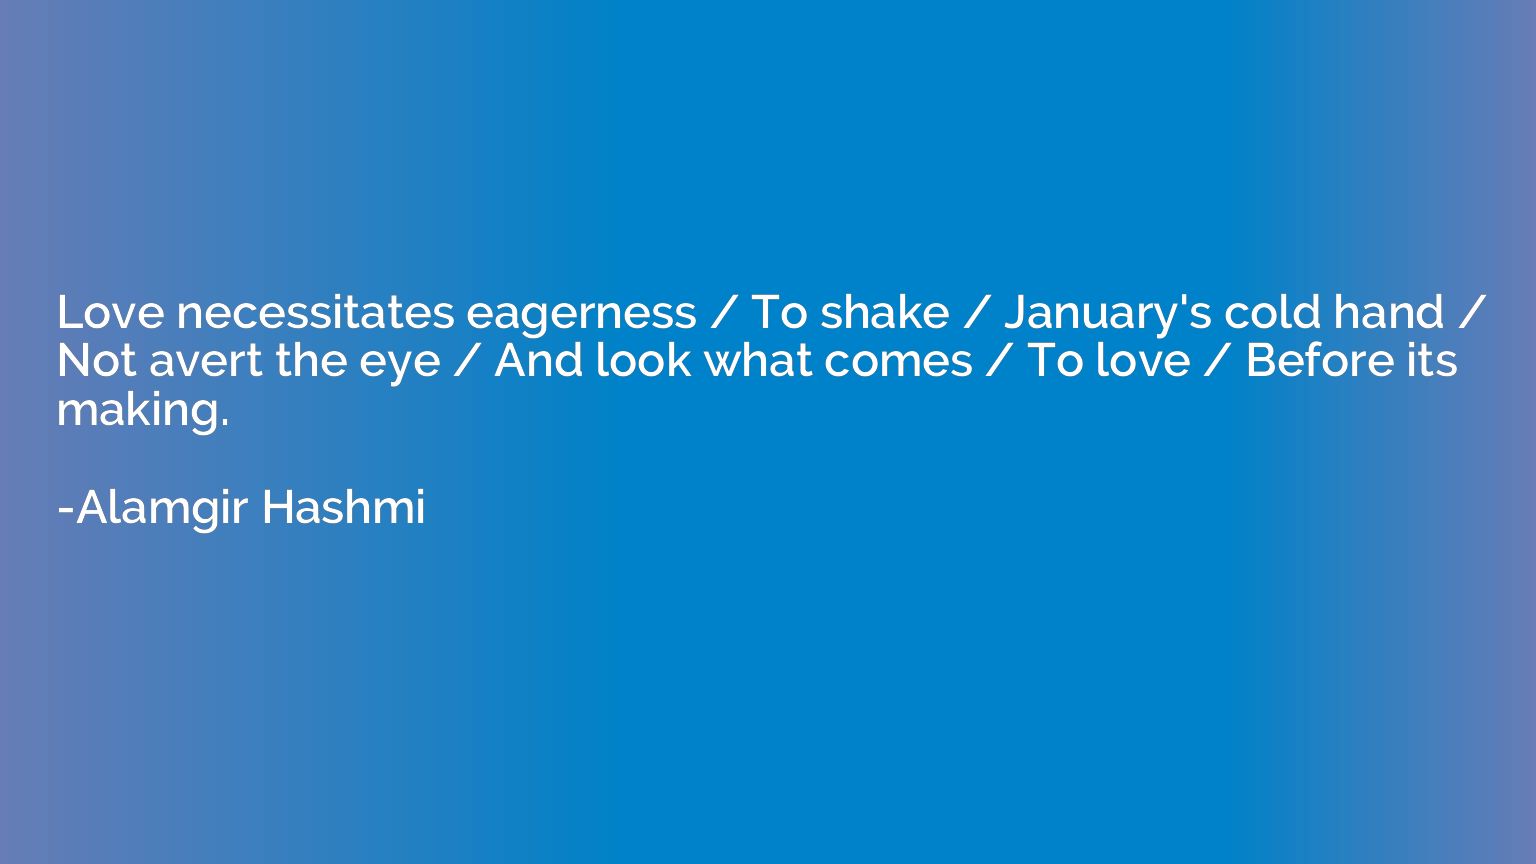 Love necessitates eagerness / To shake / January's cold hand